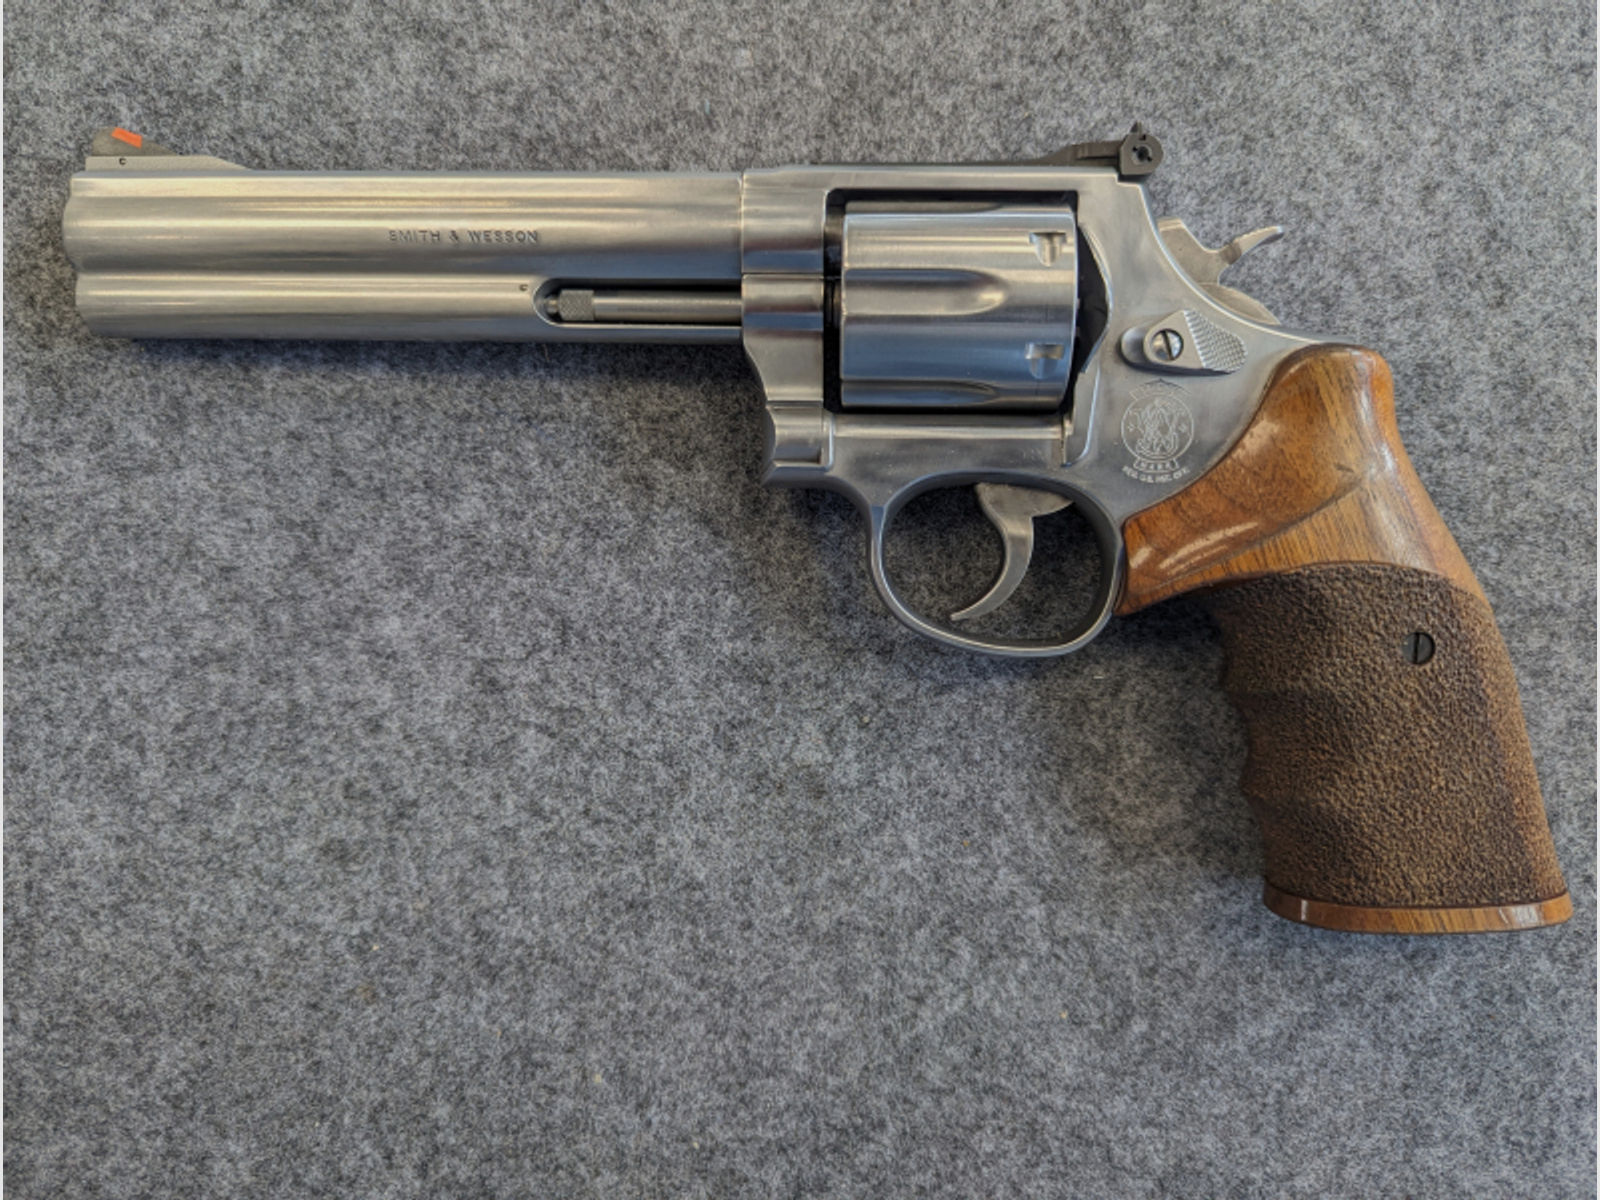 Smith & Wesson Mod. 686-5 6 Zoll Kal. 357Magnum